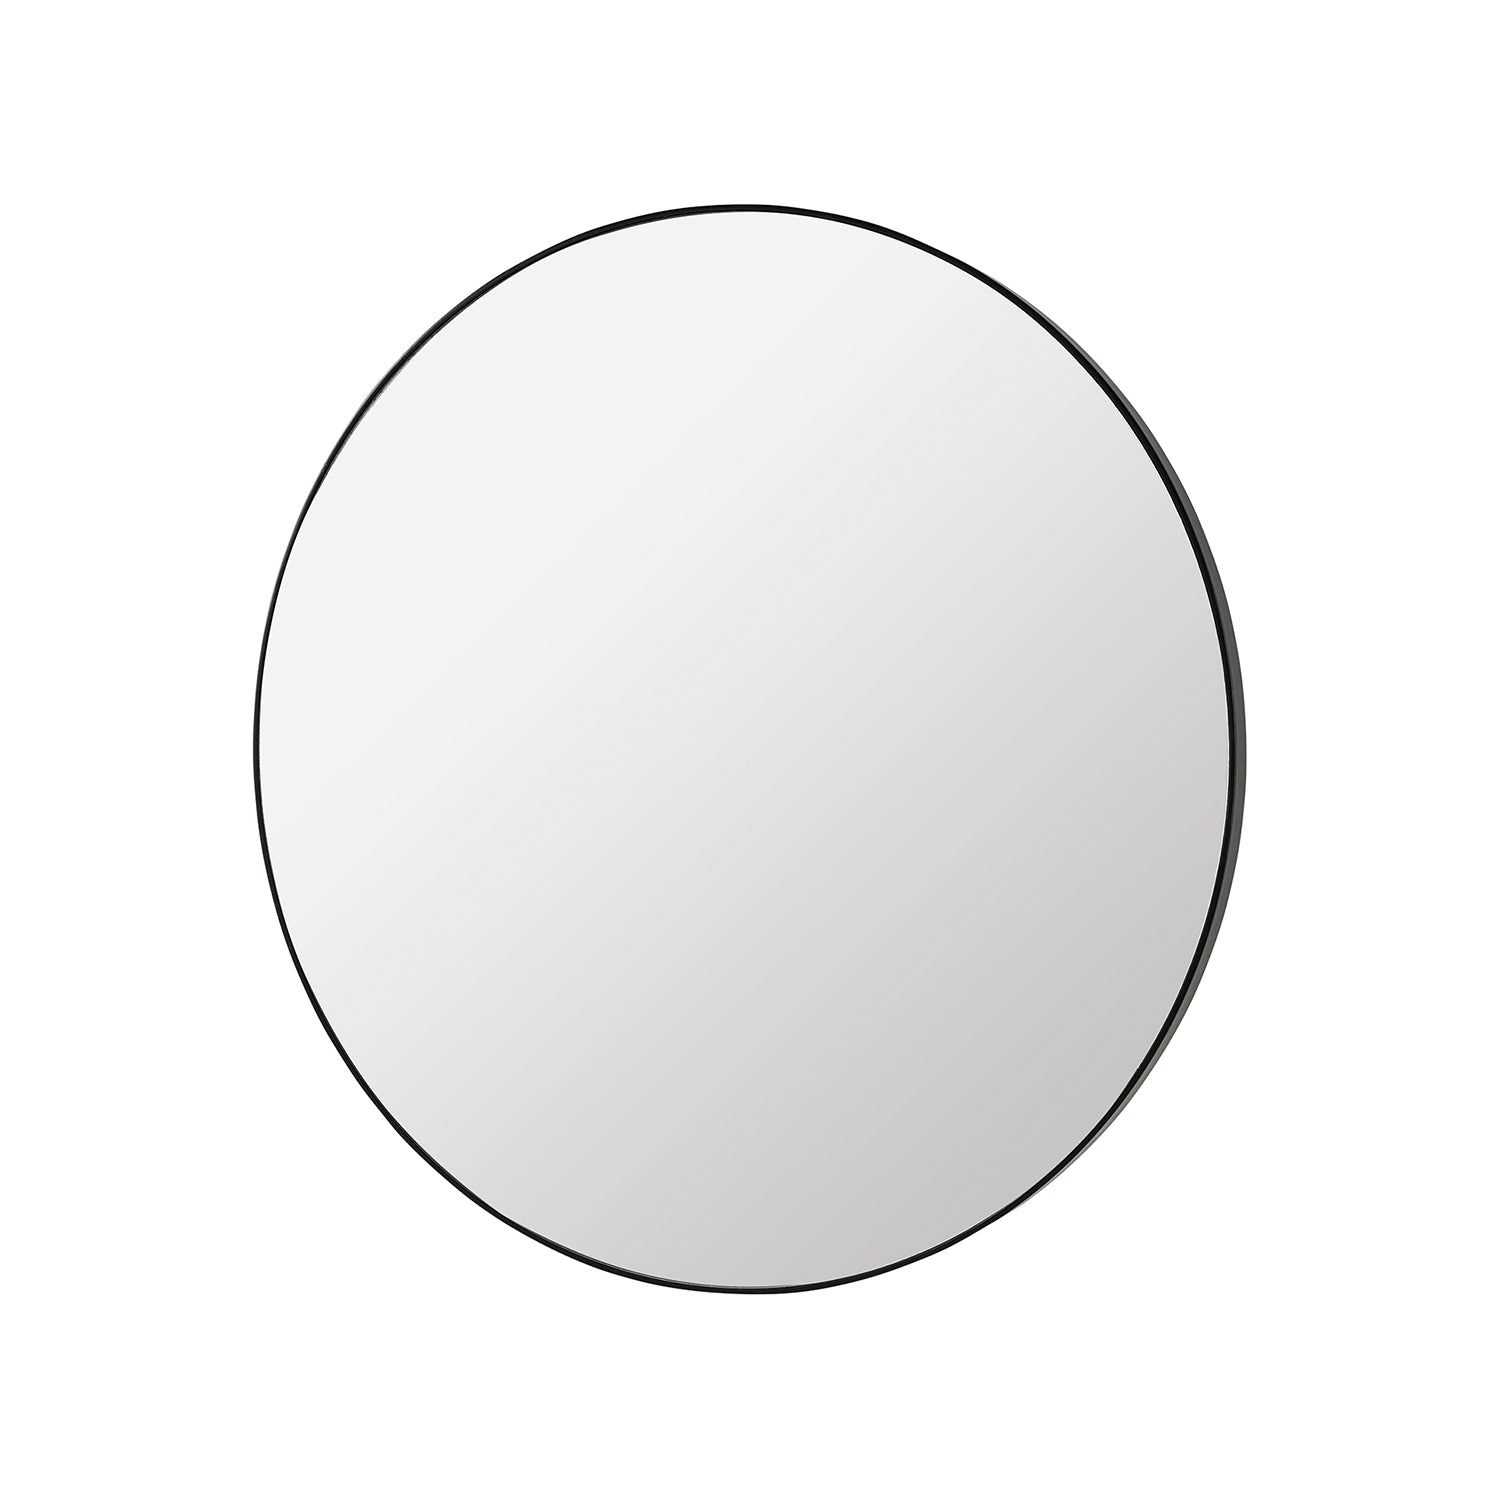 Complete Mirror - The Design Choice